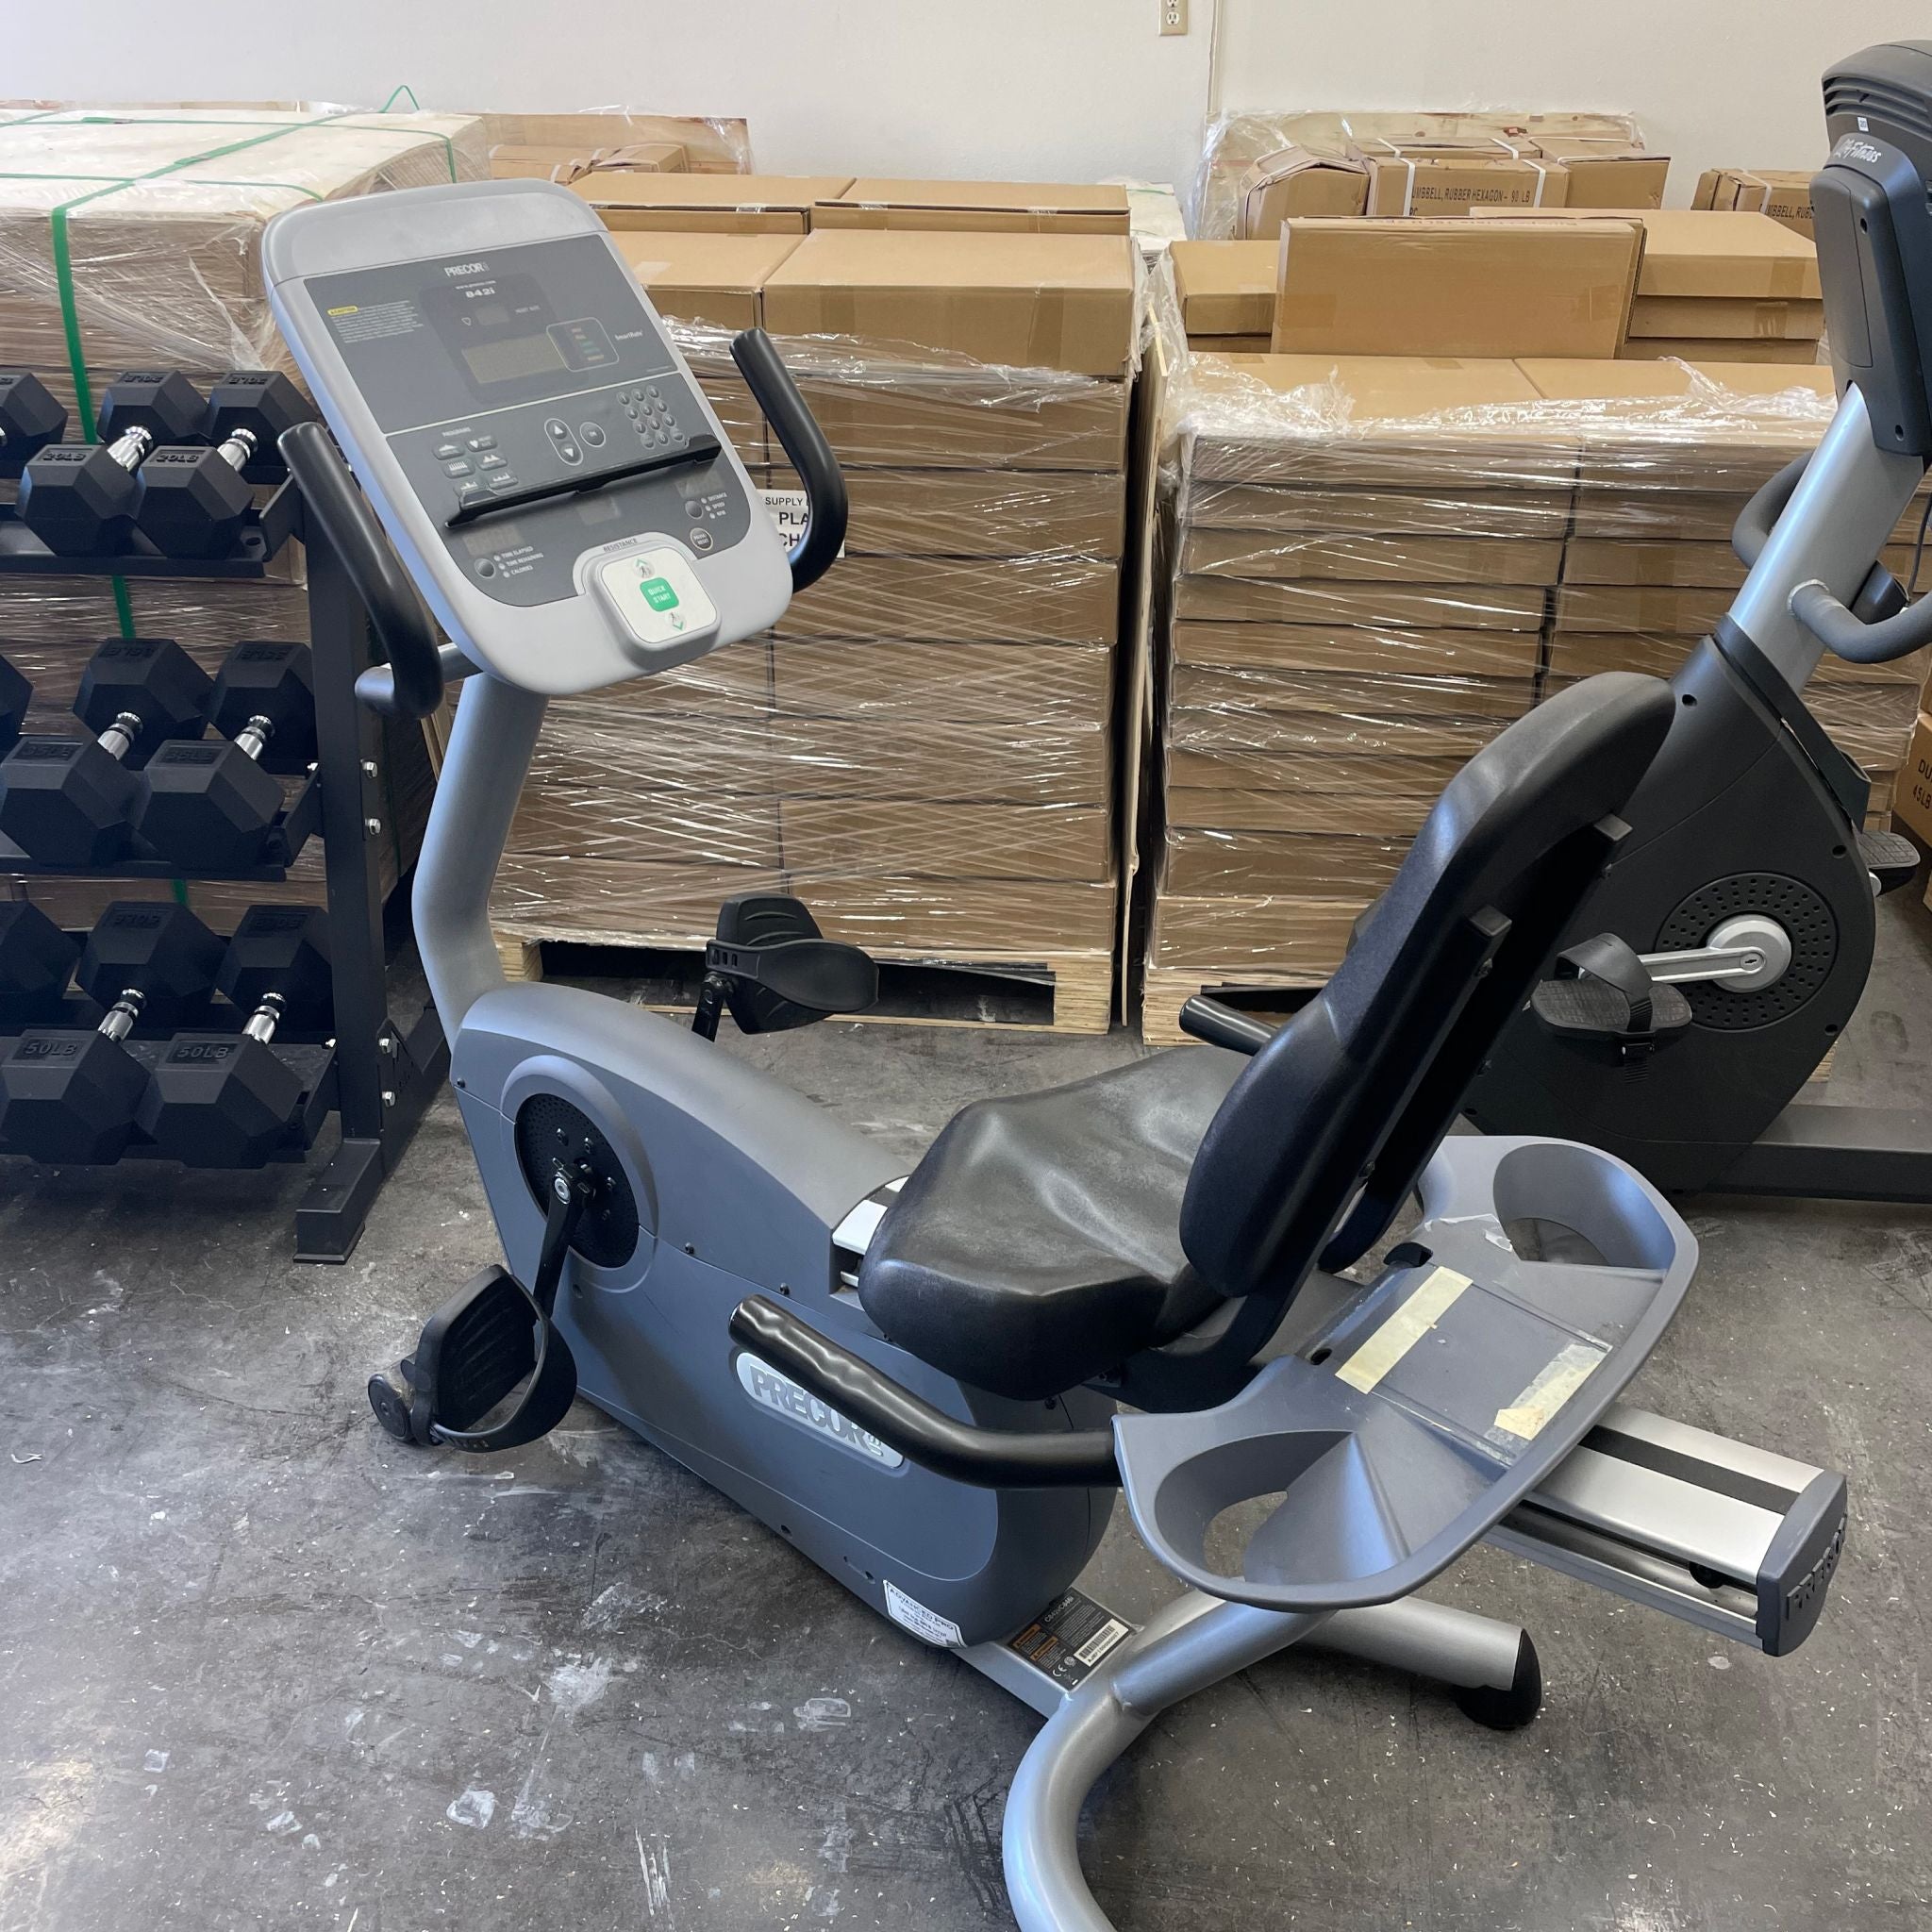 Back left view of the Precor c846i Recumbent Bike in Warehouse